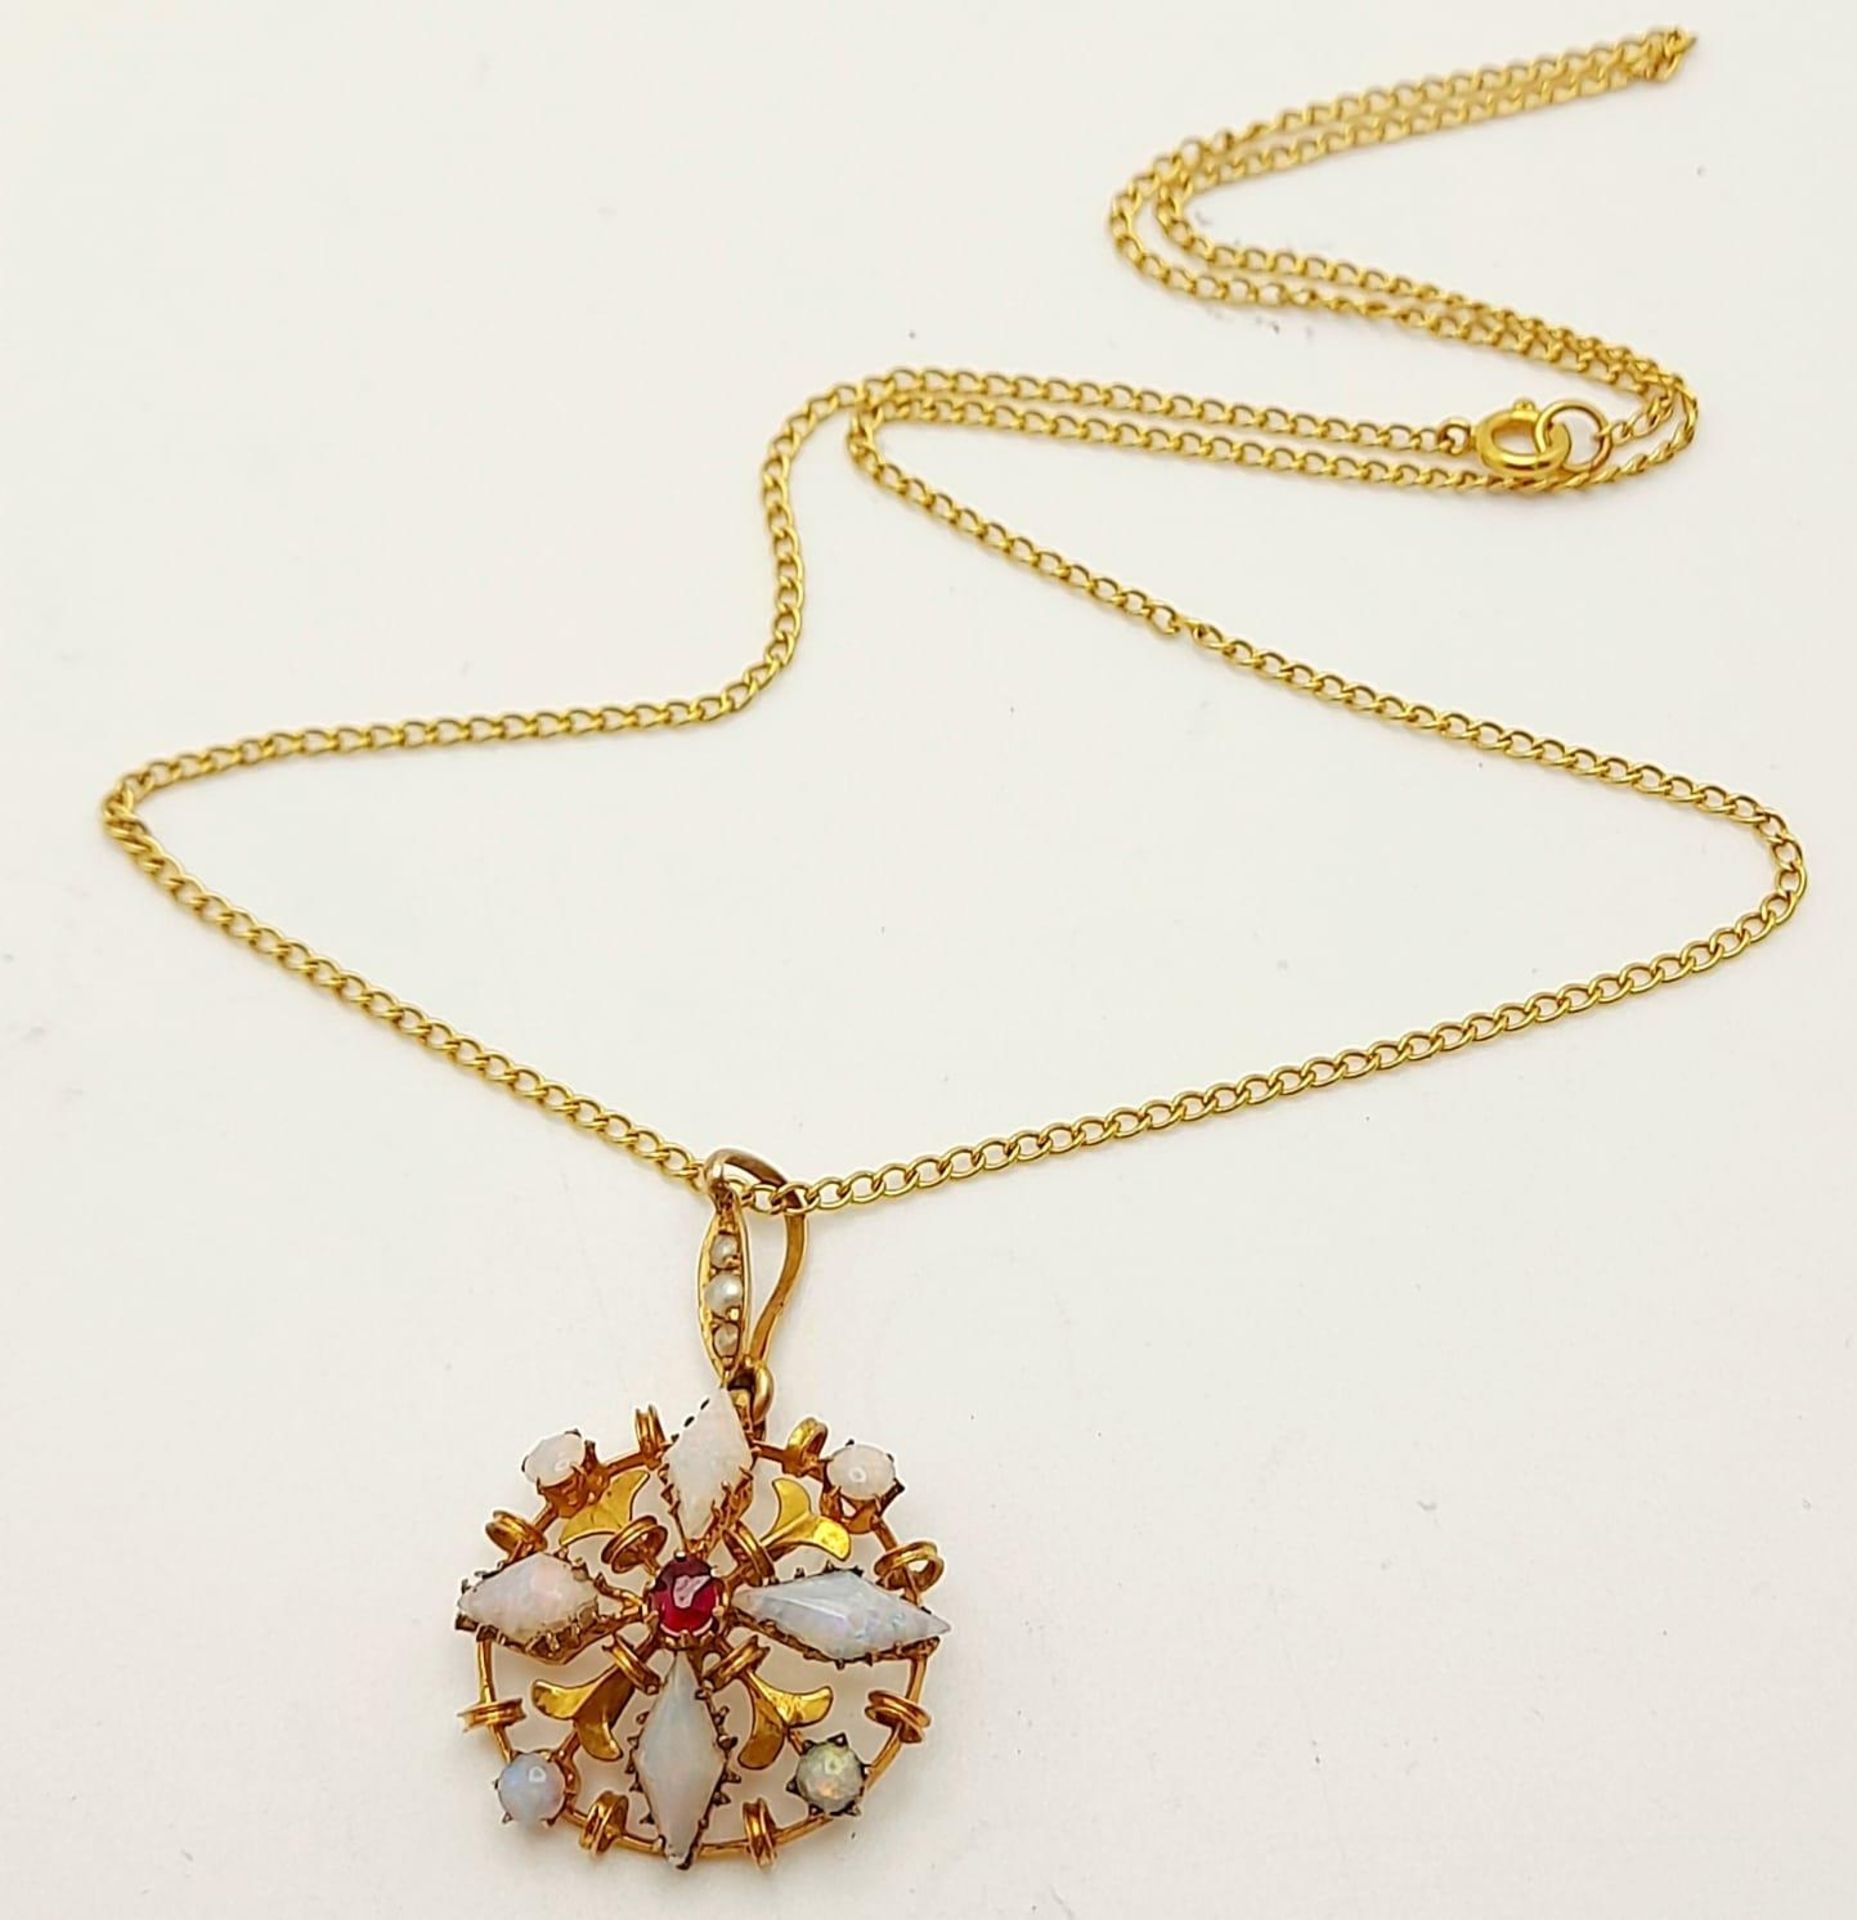 A 9K Yellow Gold and Opal Pendant on a 9K Yellow Gold Disappearing Necklace. Comes with a